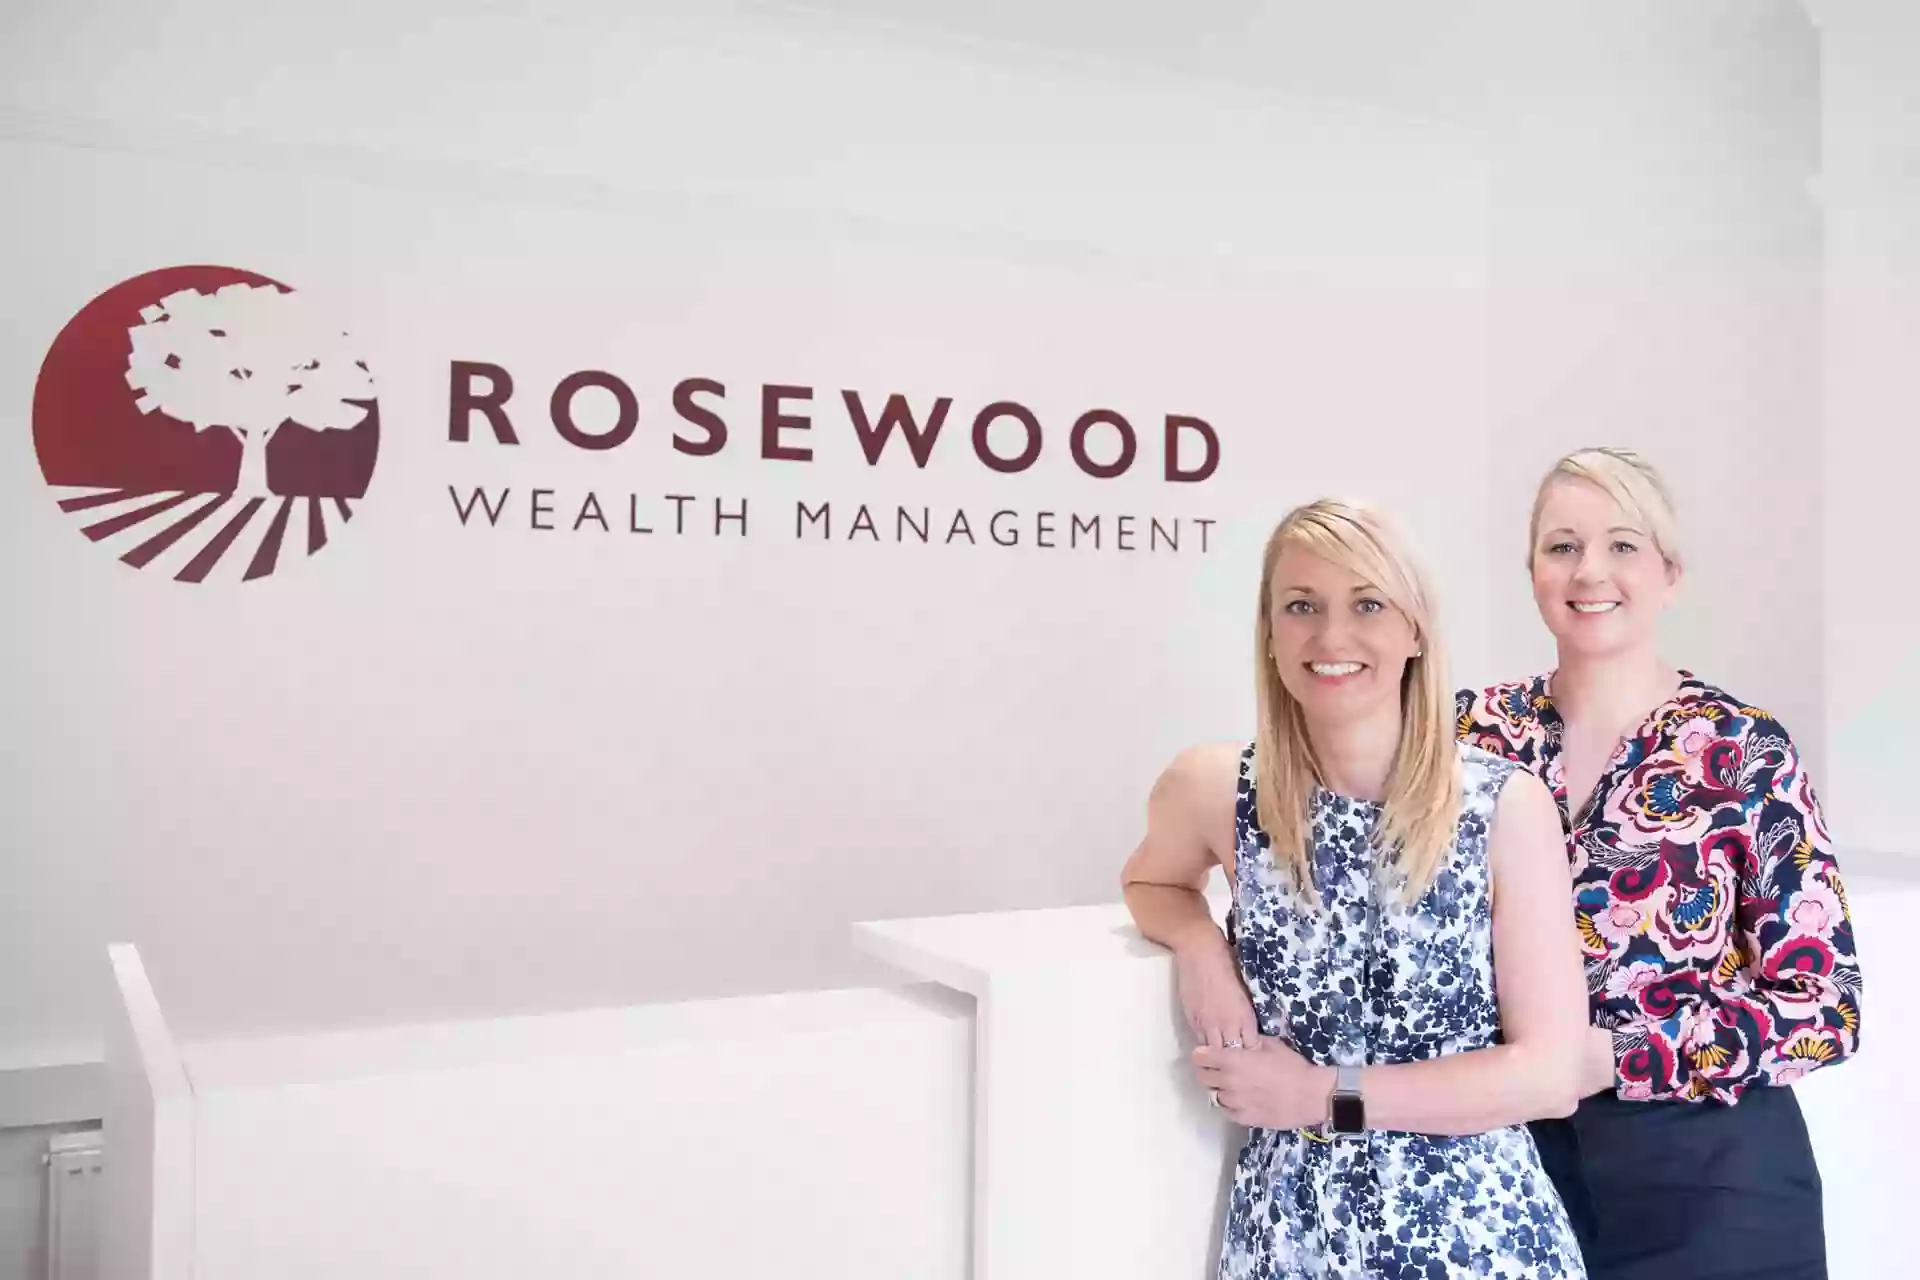 Rosewood Wealth Management